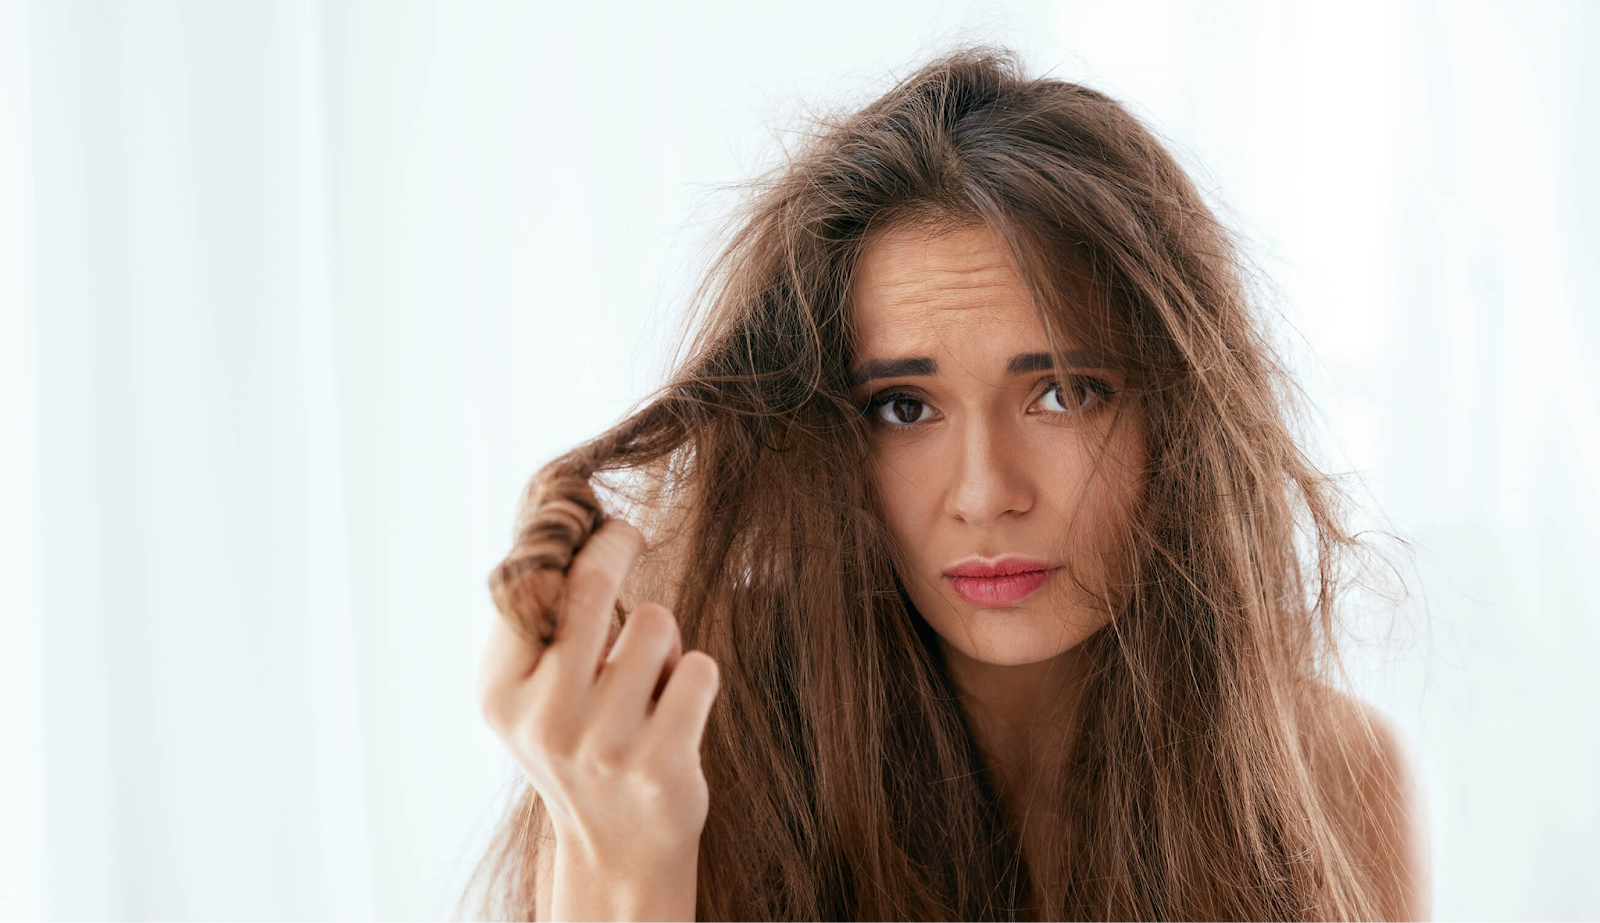 Damaged hair due to environmental stressors